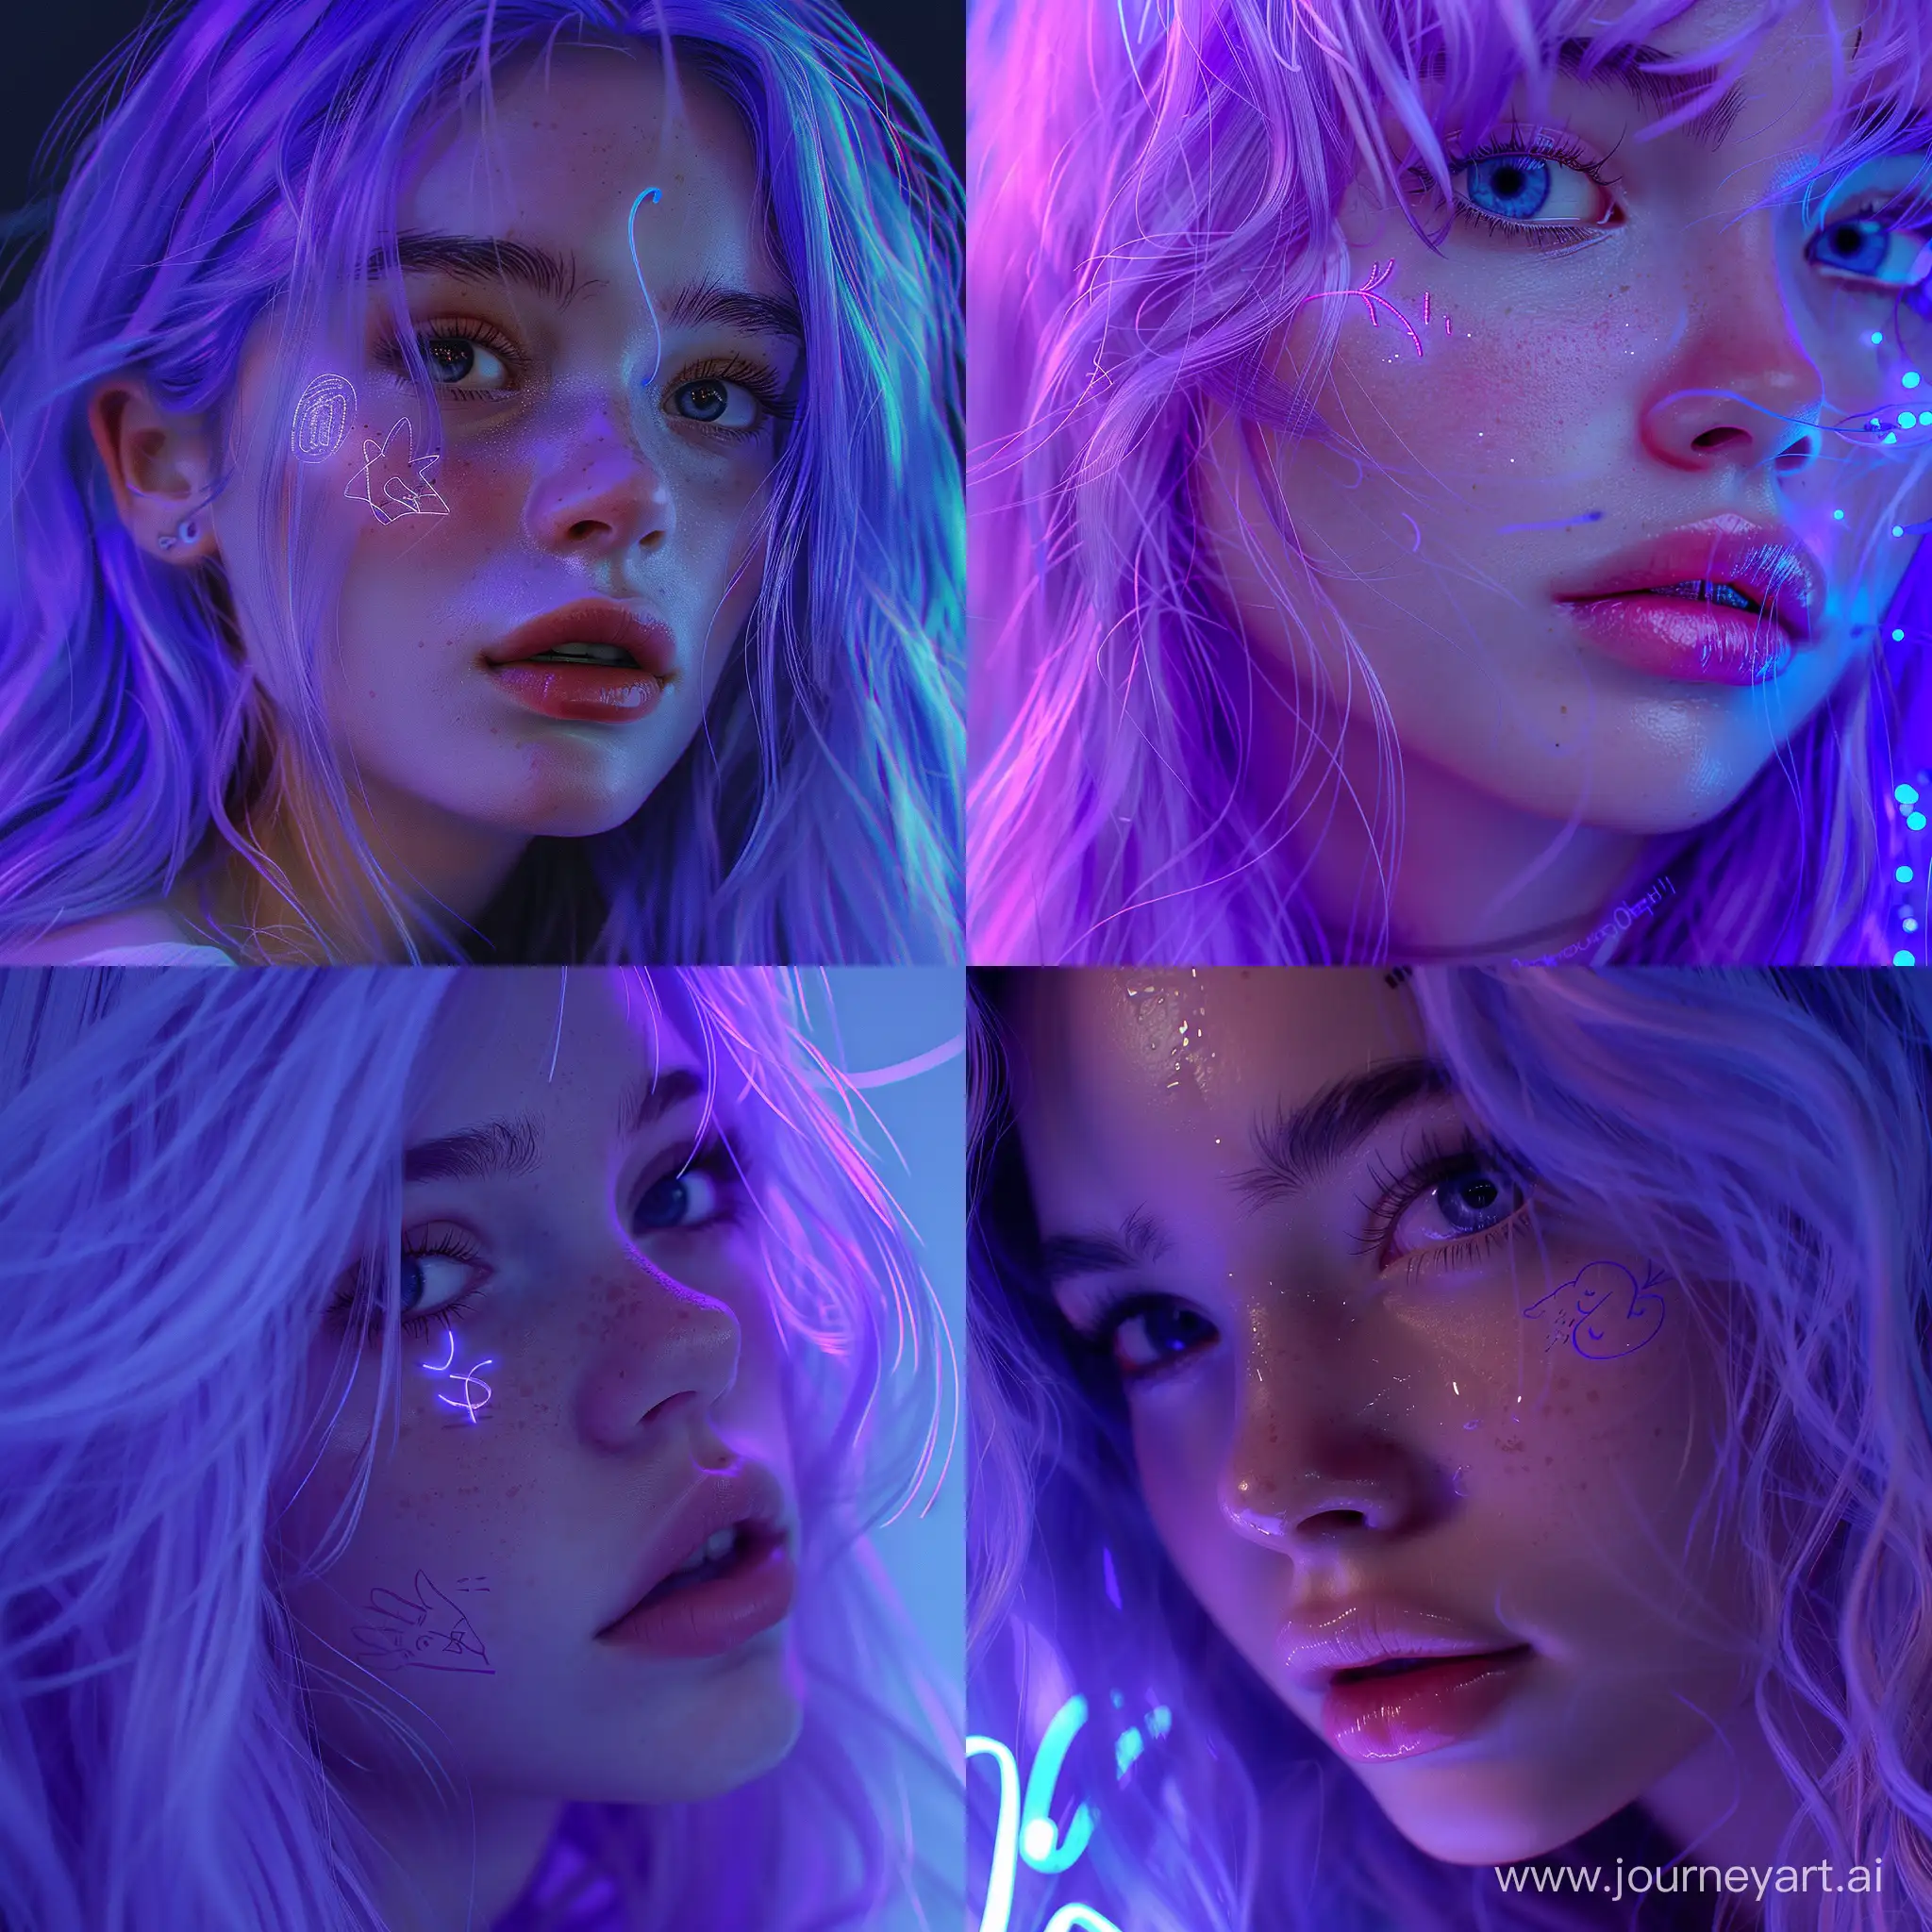 Portrait-of-a-24YearOld-Girl-with-Soft-Purple-Hair-and-Neon-Lighting